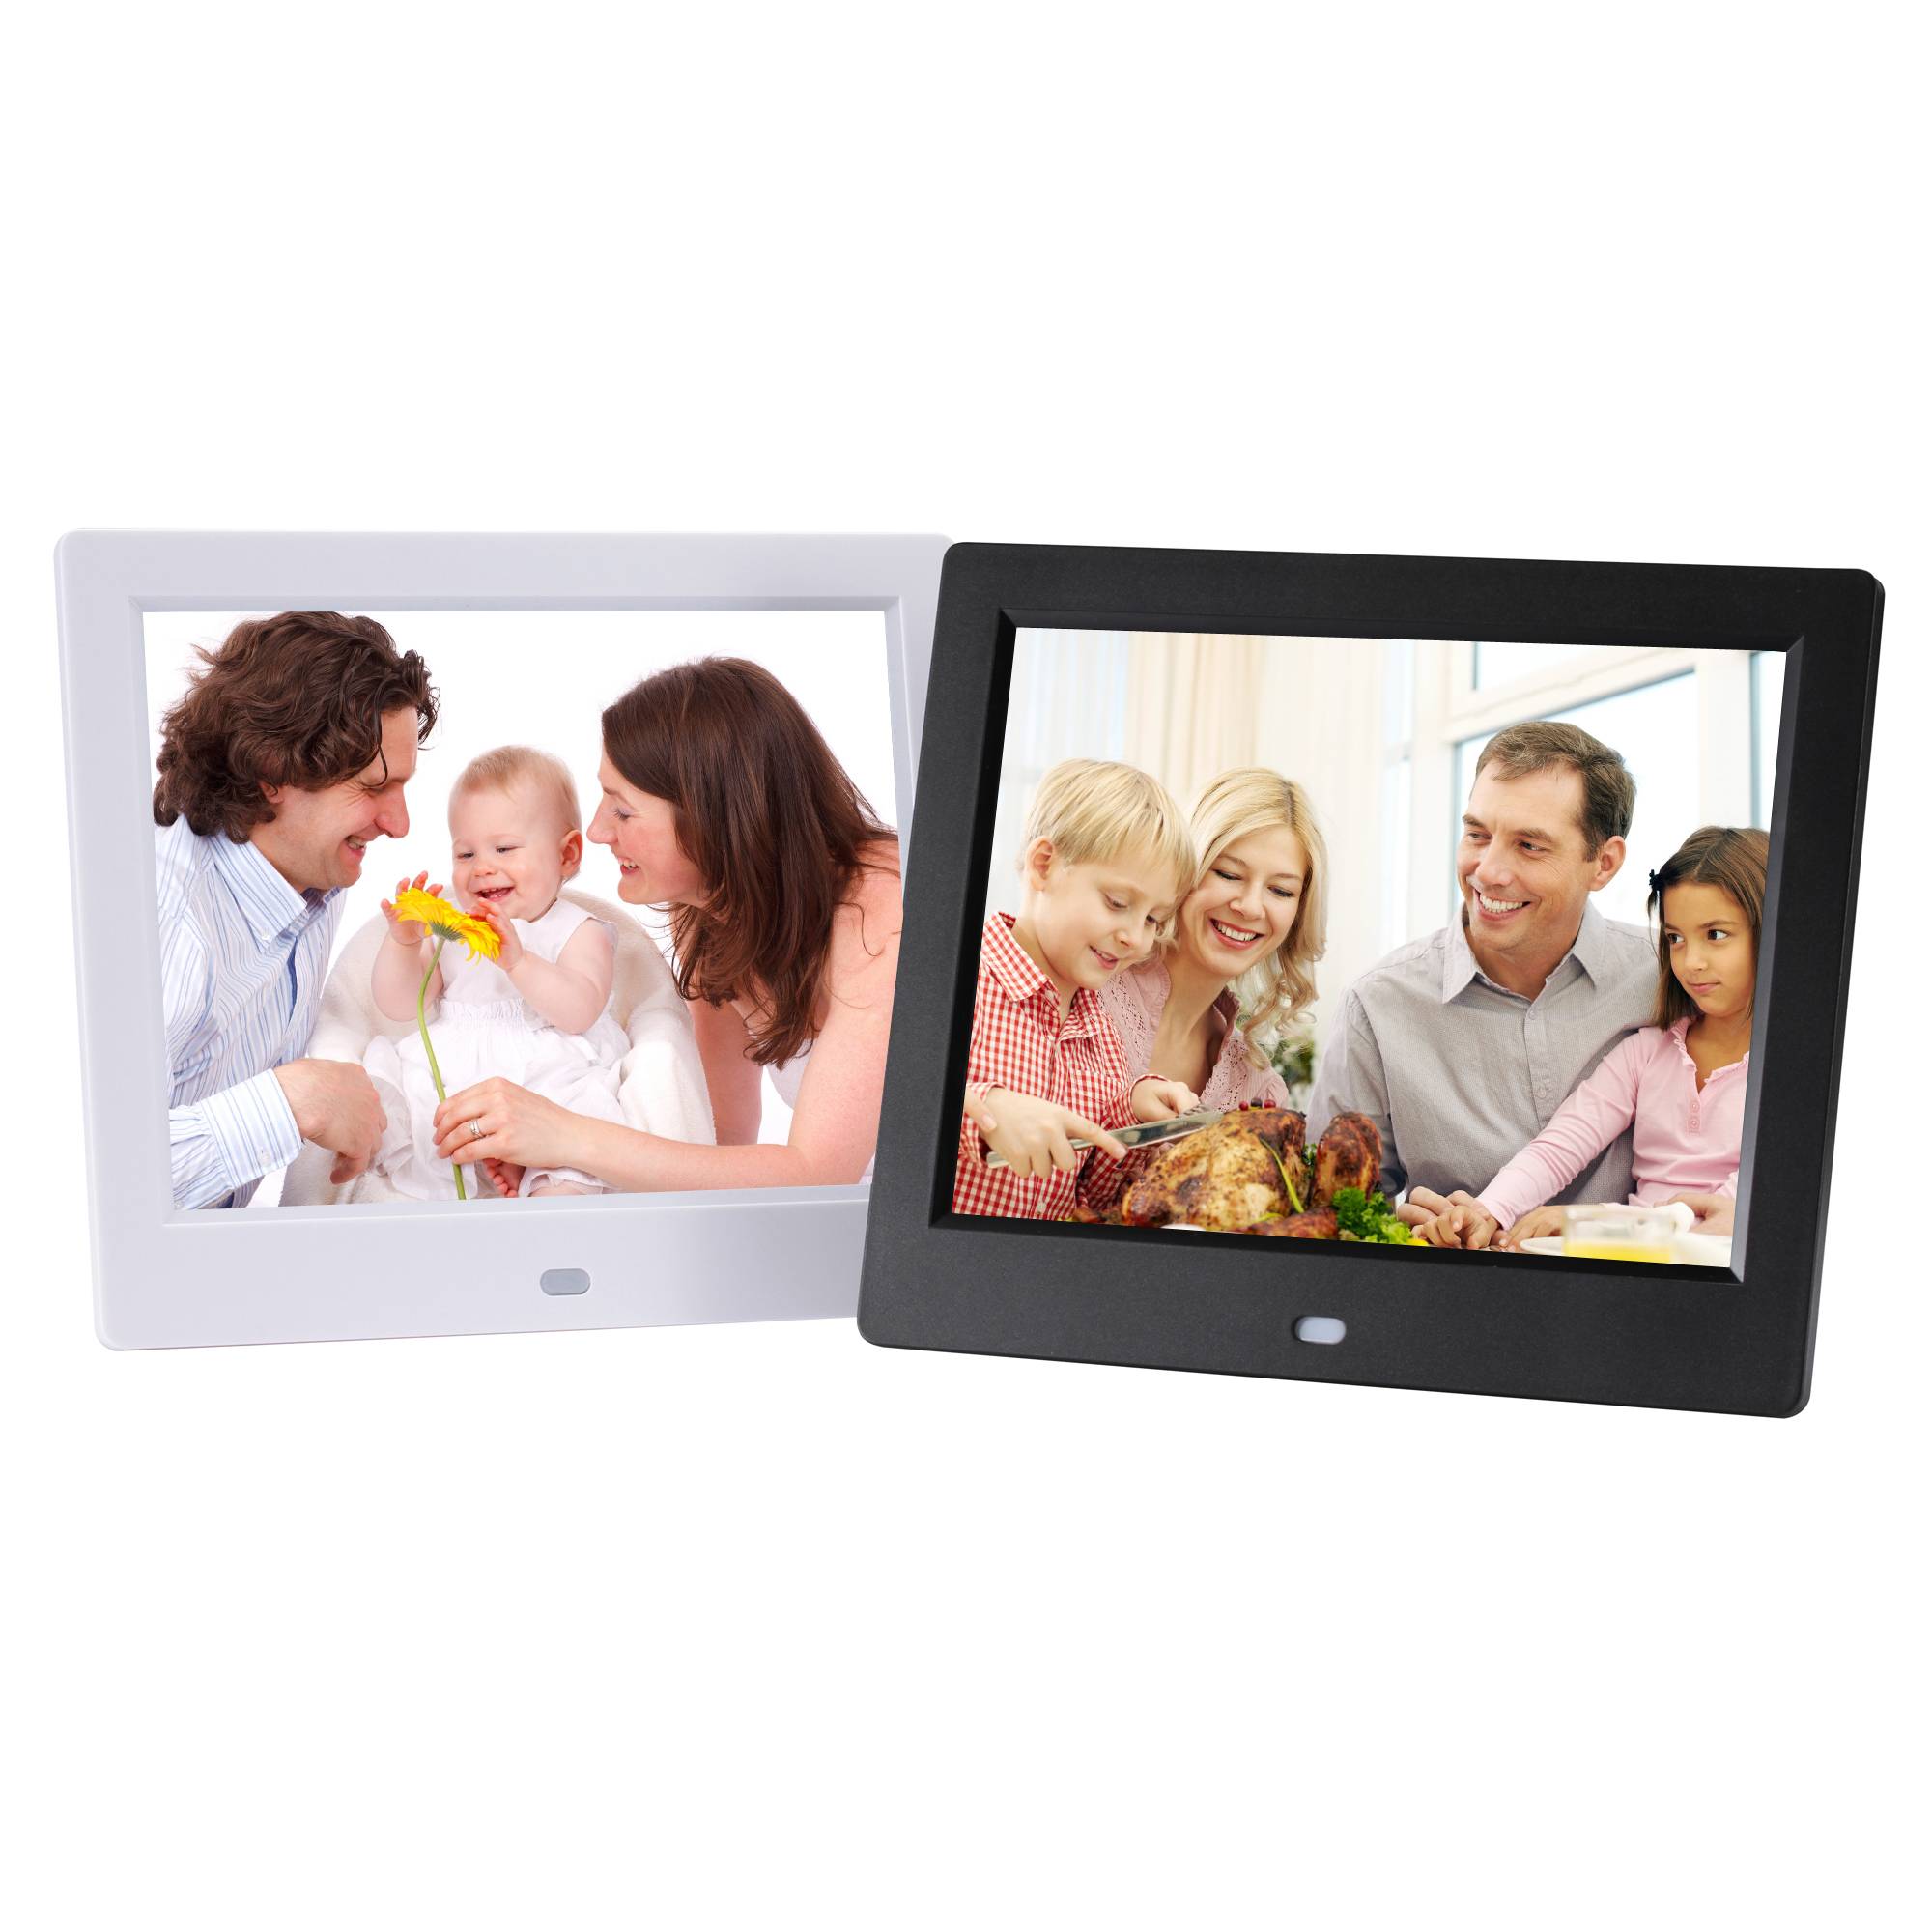 OEM Customized Cloud Photo Frame - 8 inch slideshow cheap video player digital picture frame digital photo frame commercial advertising HD support 720P – Idealway